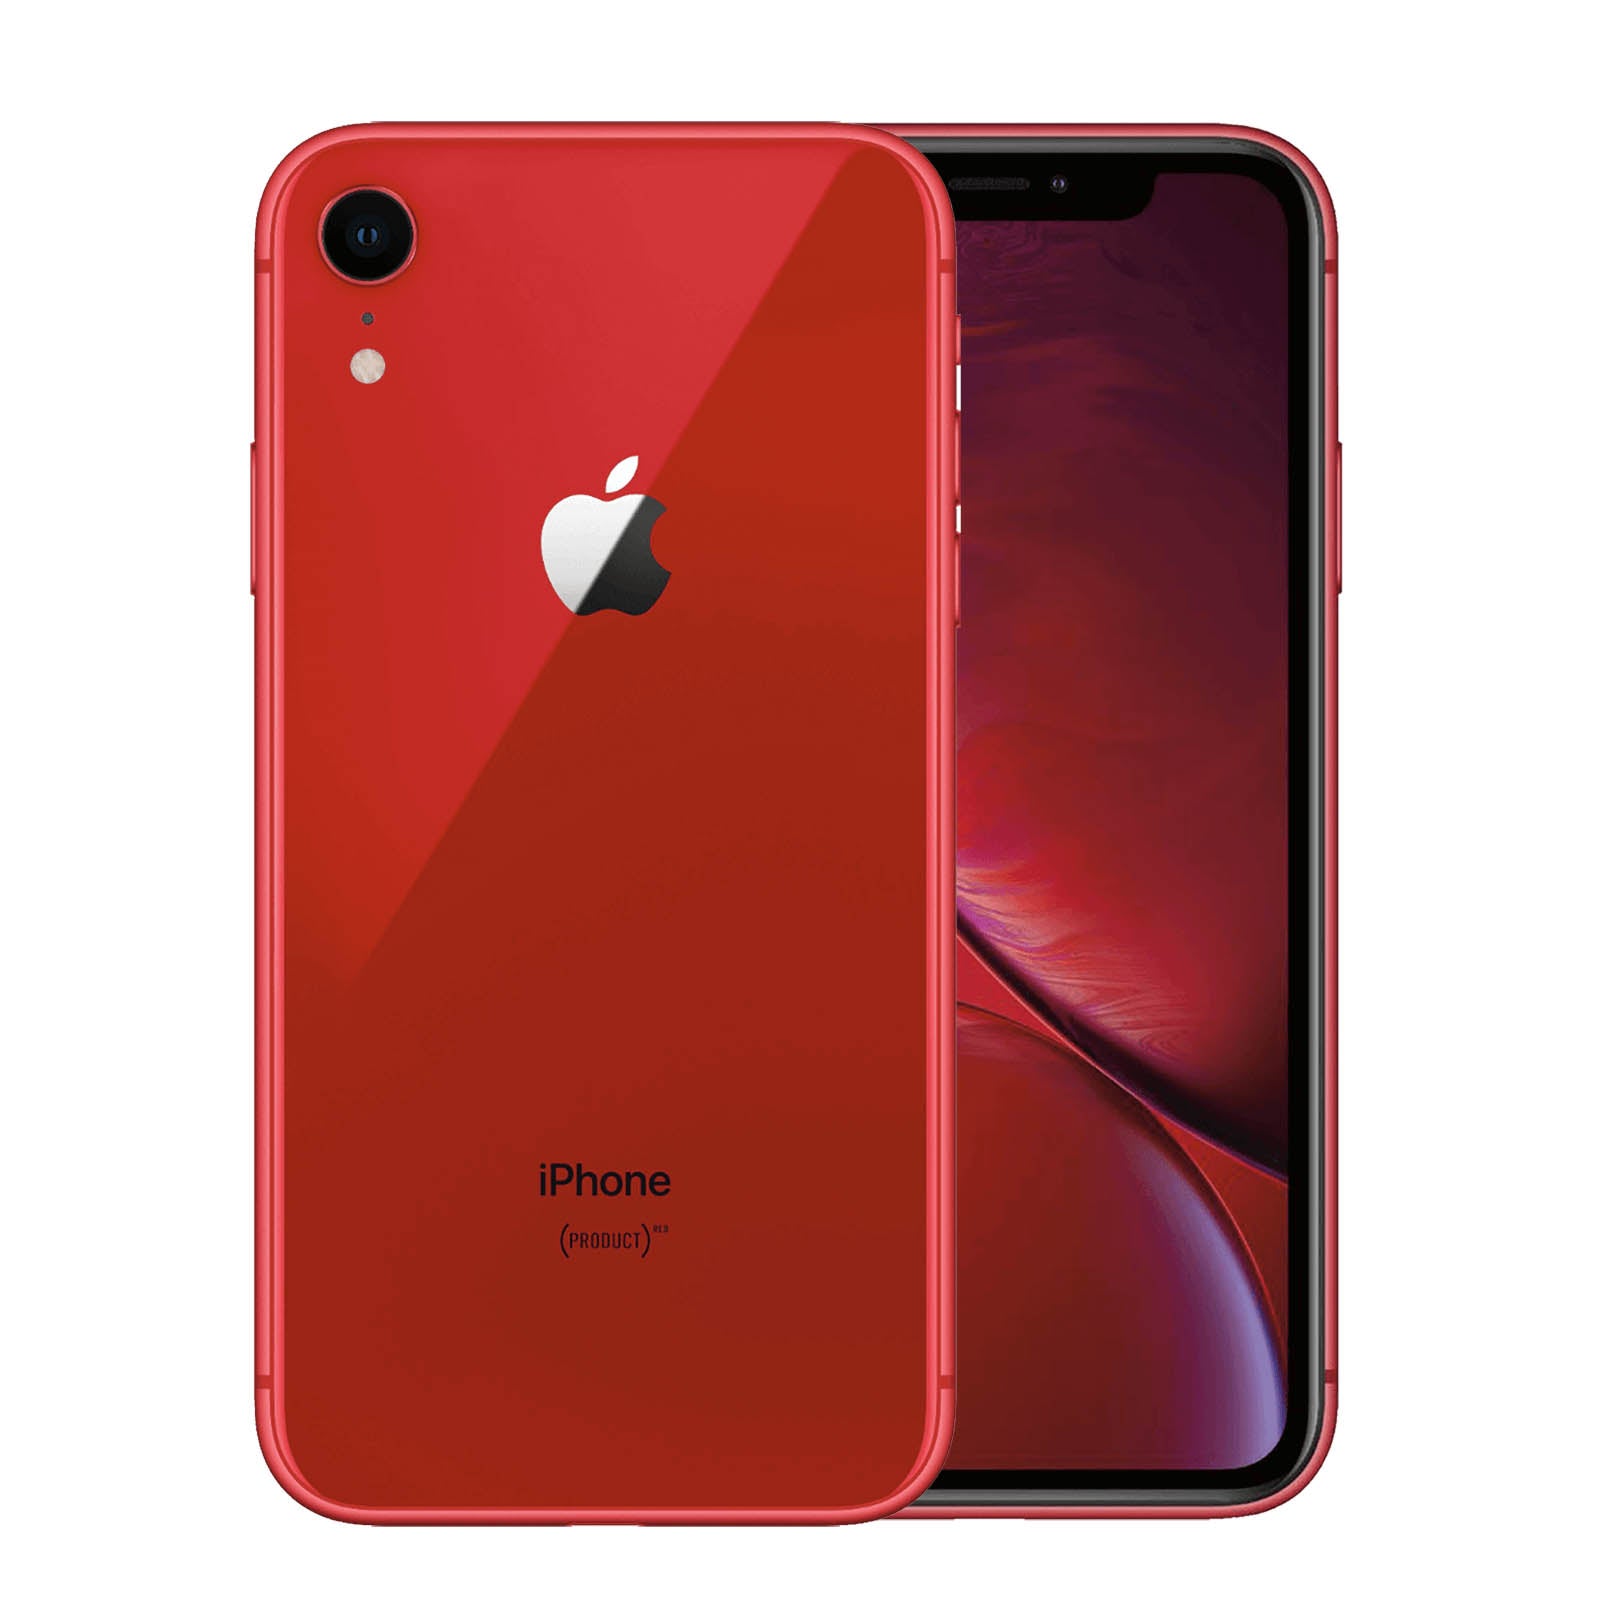 Apple iPhone XR 64GB Product Red Impecable - Desbloqueado